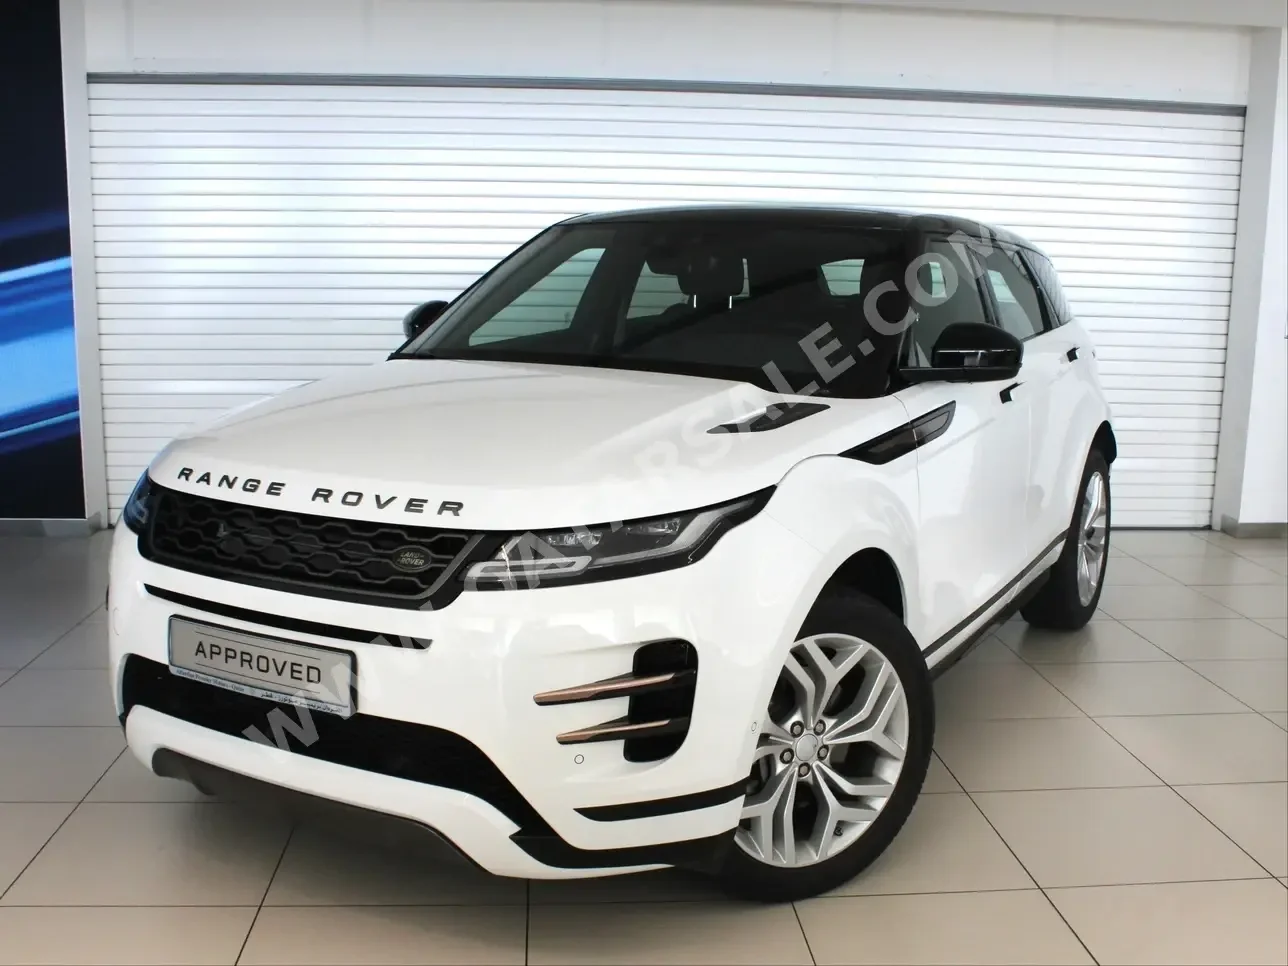 Land Rover  Evoque  R Dynamic SE  2020  Automatic  55,358 Km  4 Cylinder  All Wheel Drive (AWD)  SUV  White  With Warranty